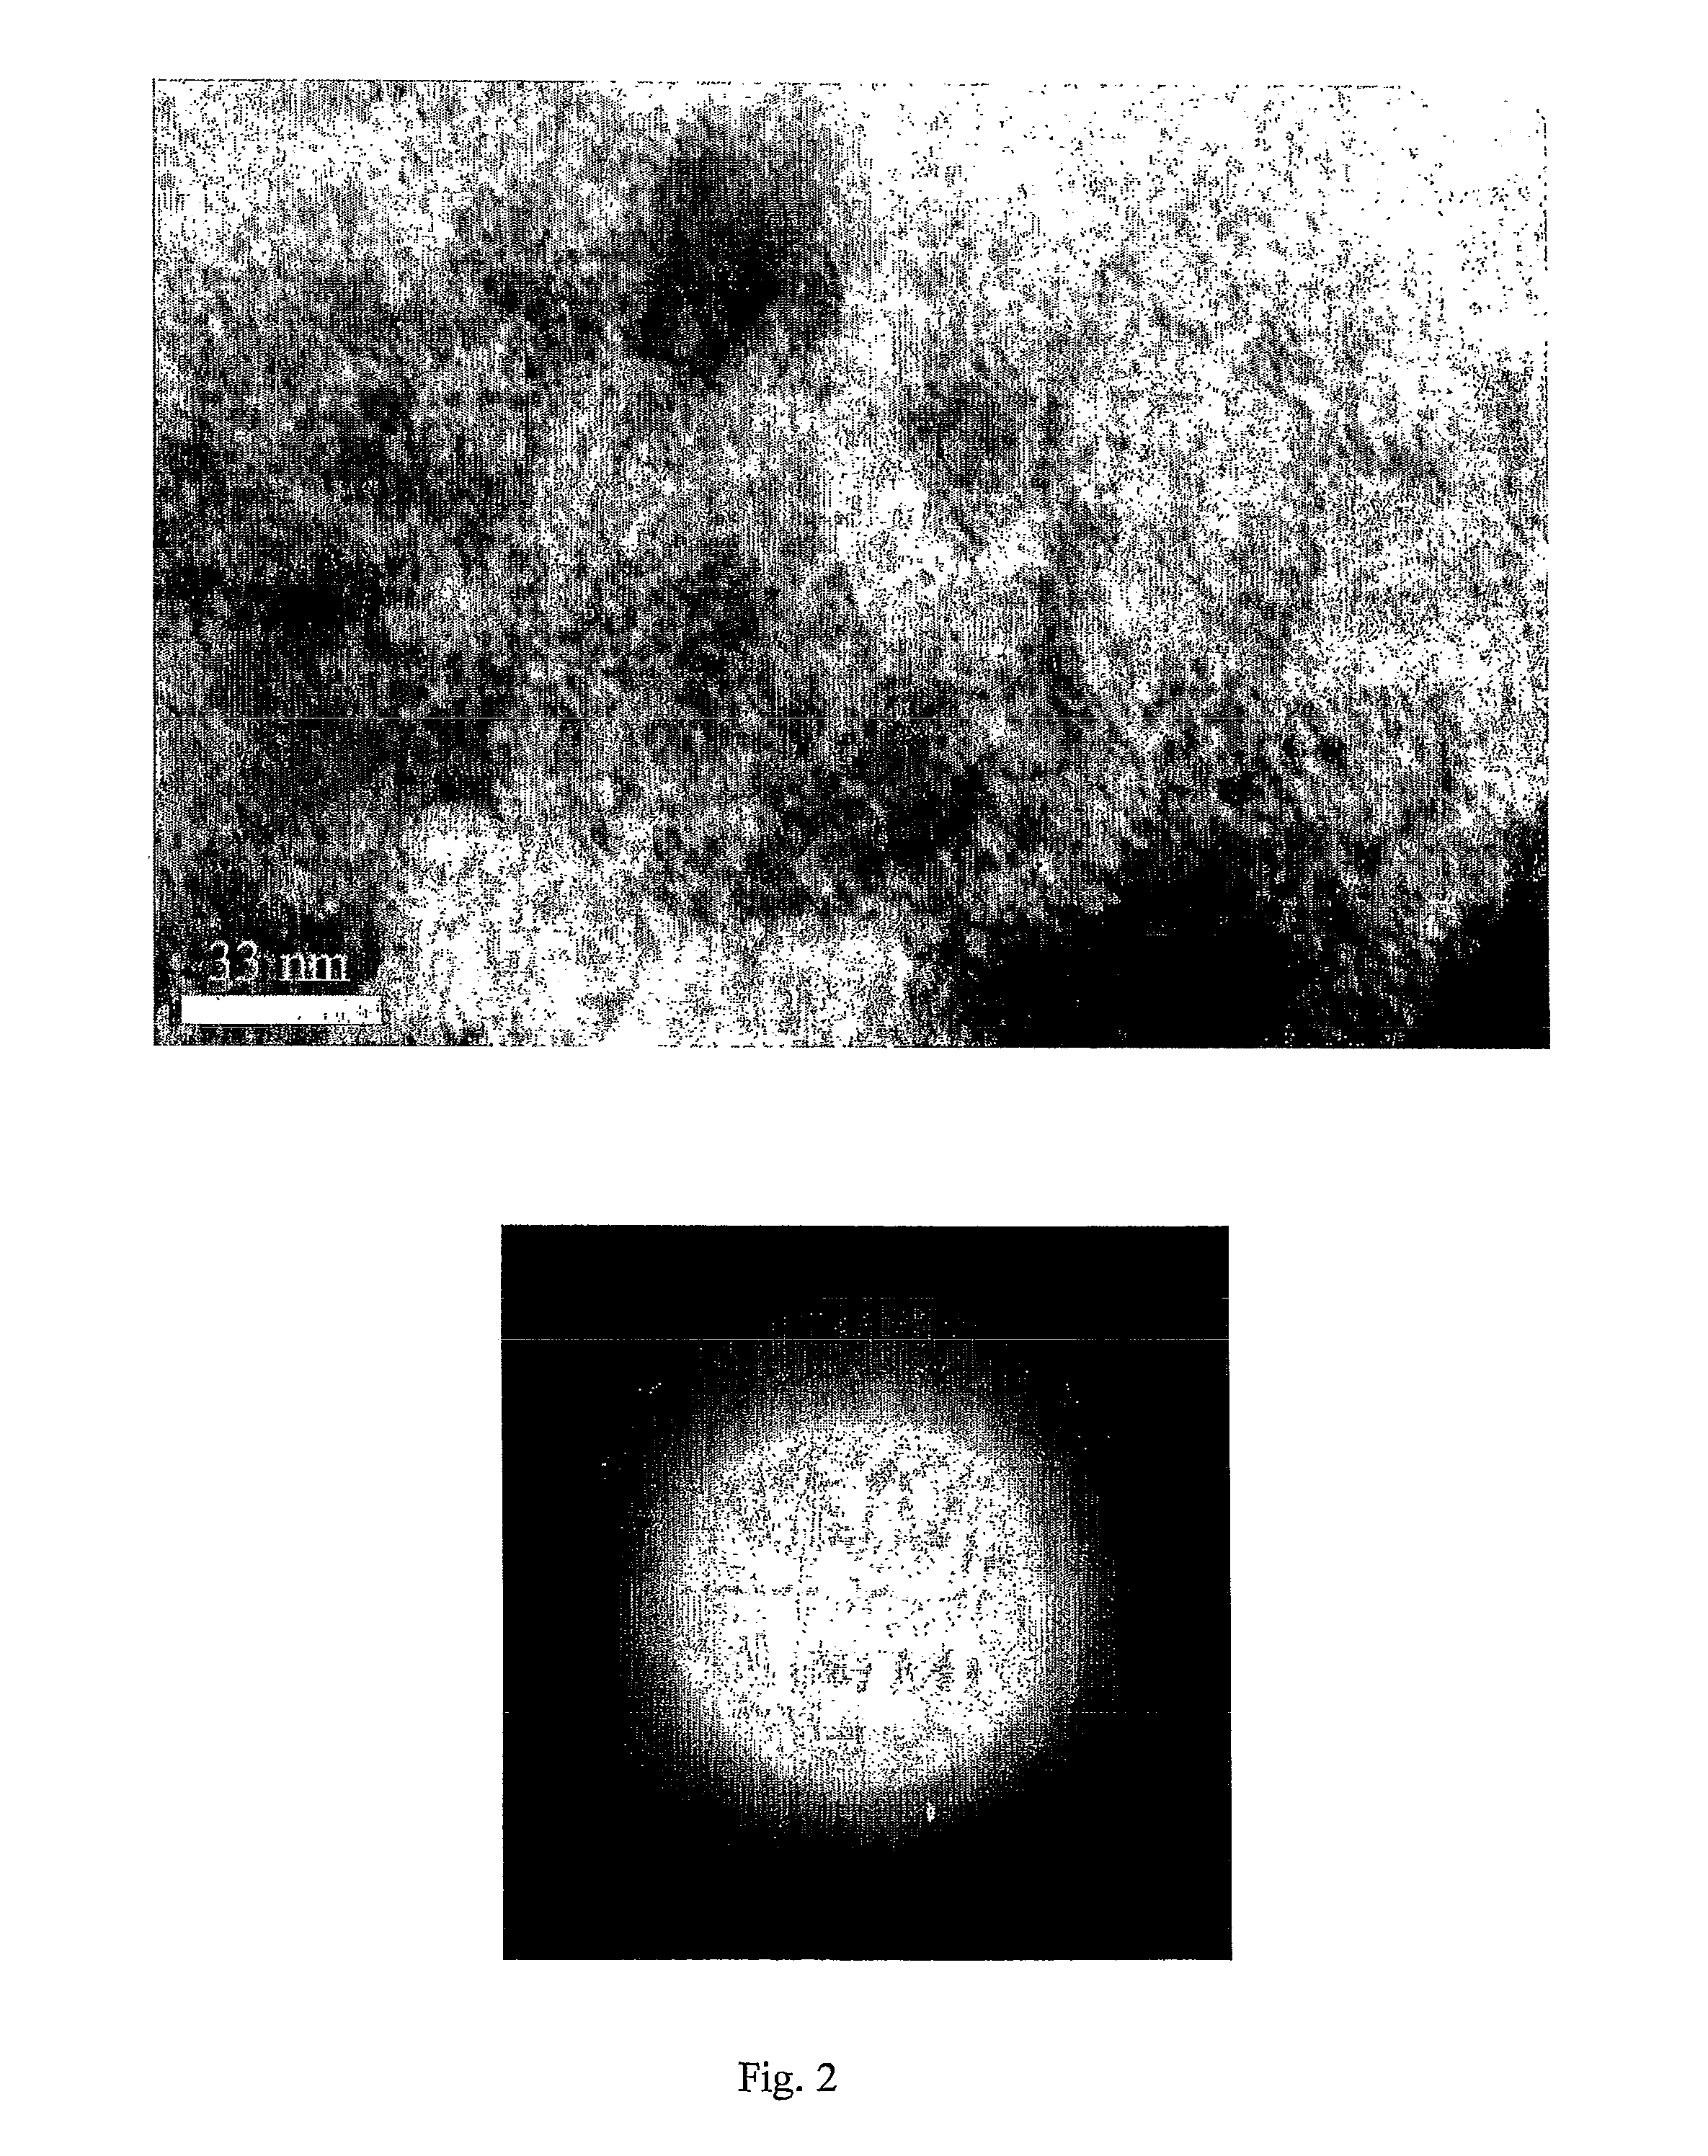 Method for producing nanoparticles for magnetic fluids by electron-beam evaporation and condensation in vacuum, a magnetic fluid producing method and magnetic fluid produced according to said method